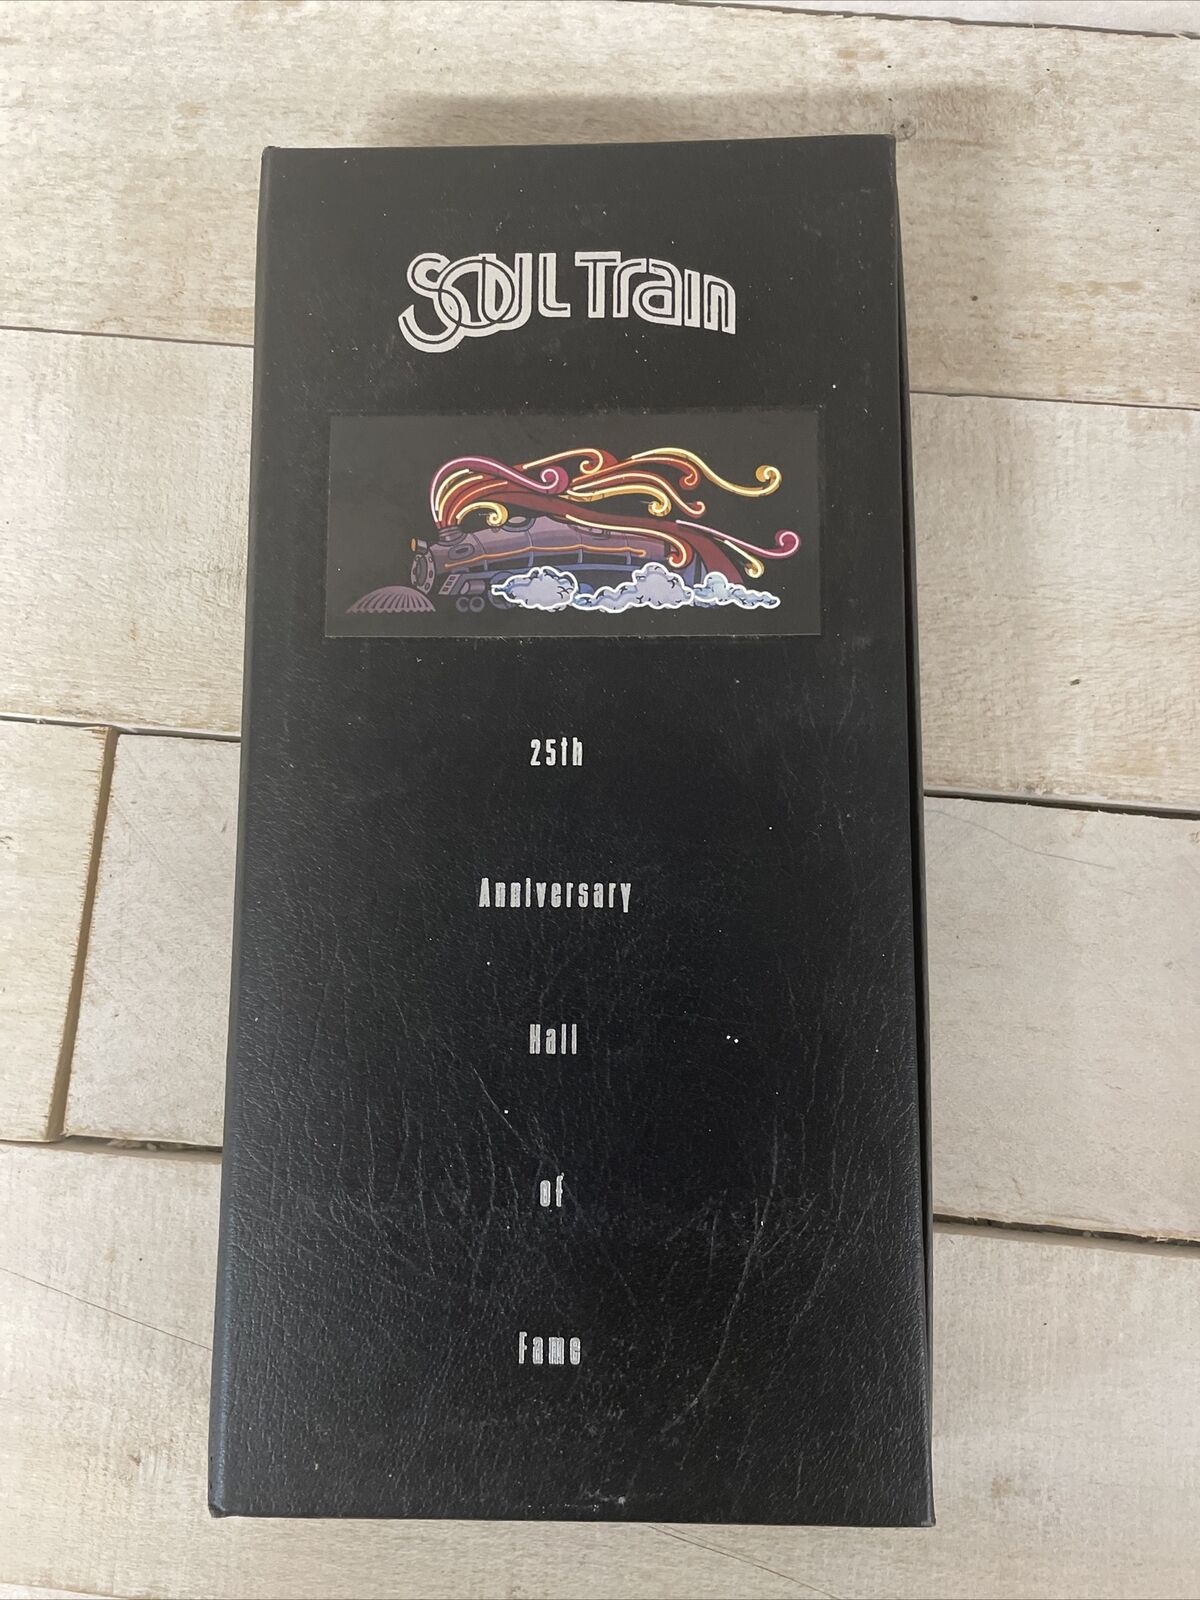 Soul Train 25th Anniversary Hall of Fame Box Set [Box] by Various Artists...